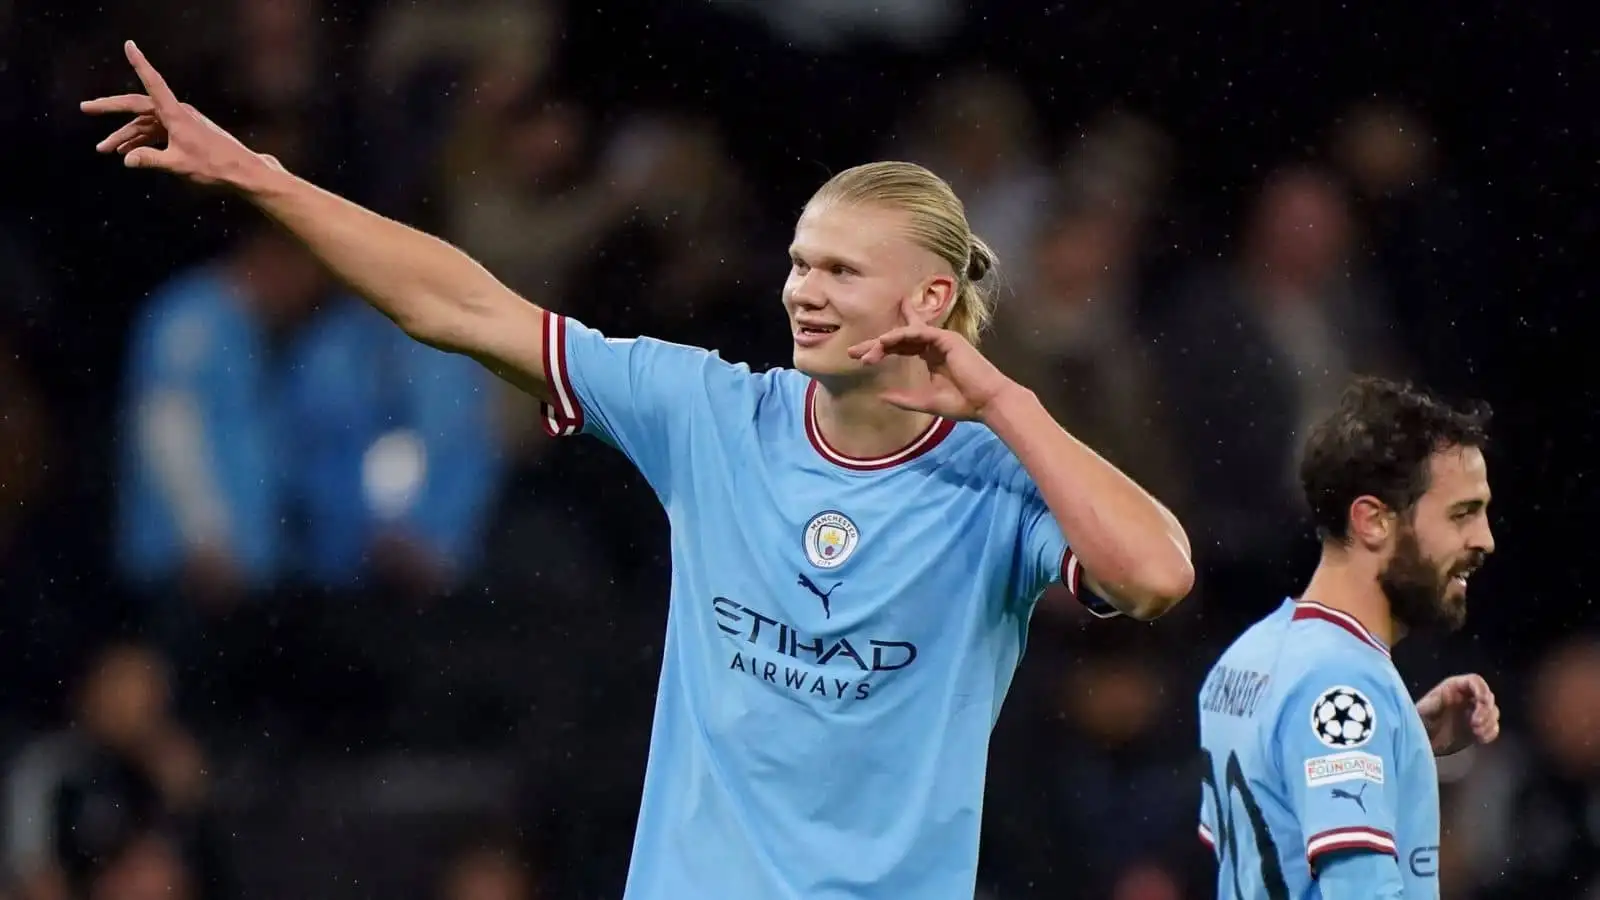 Erling Haaland celebrates scoring his second goal of the game for Manchester City during the UEFA Champions League Group G match at the Etihad Stadium, Manchester.